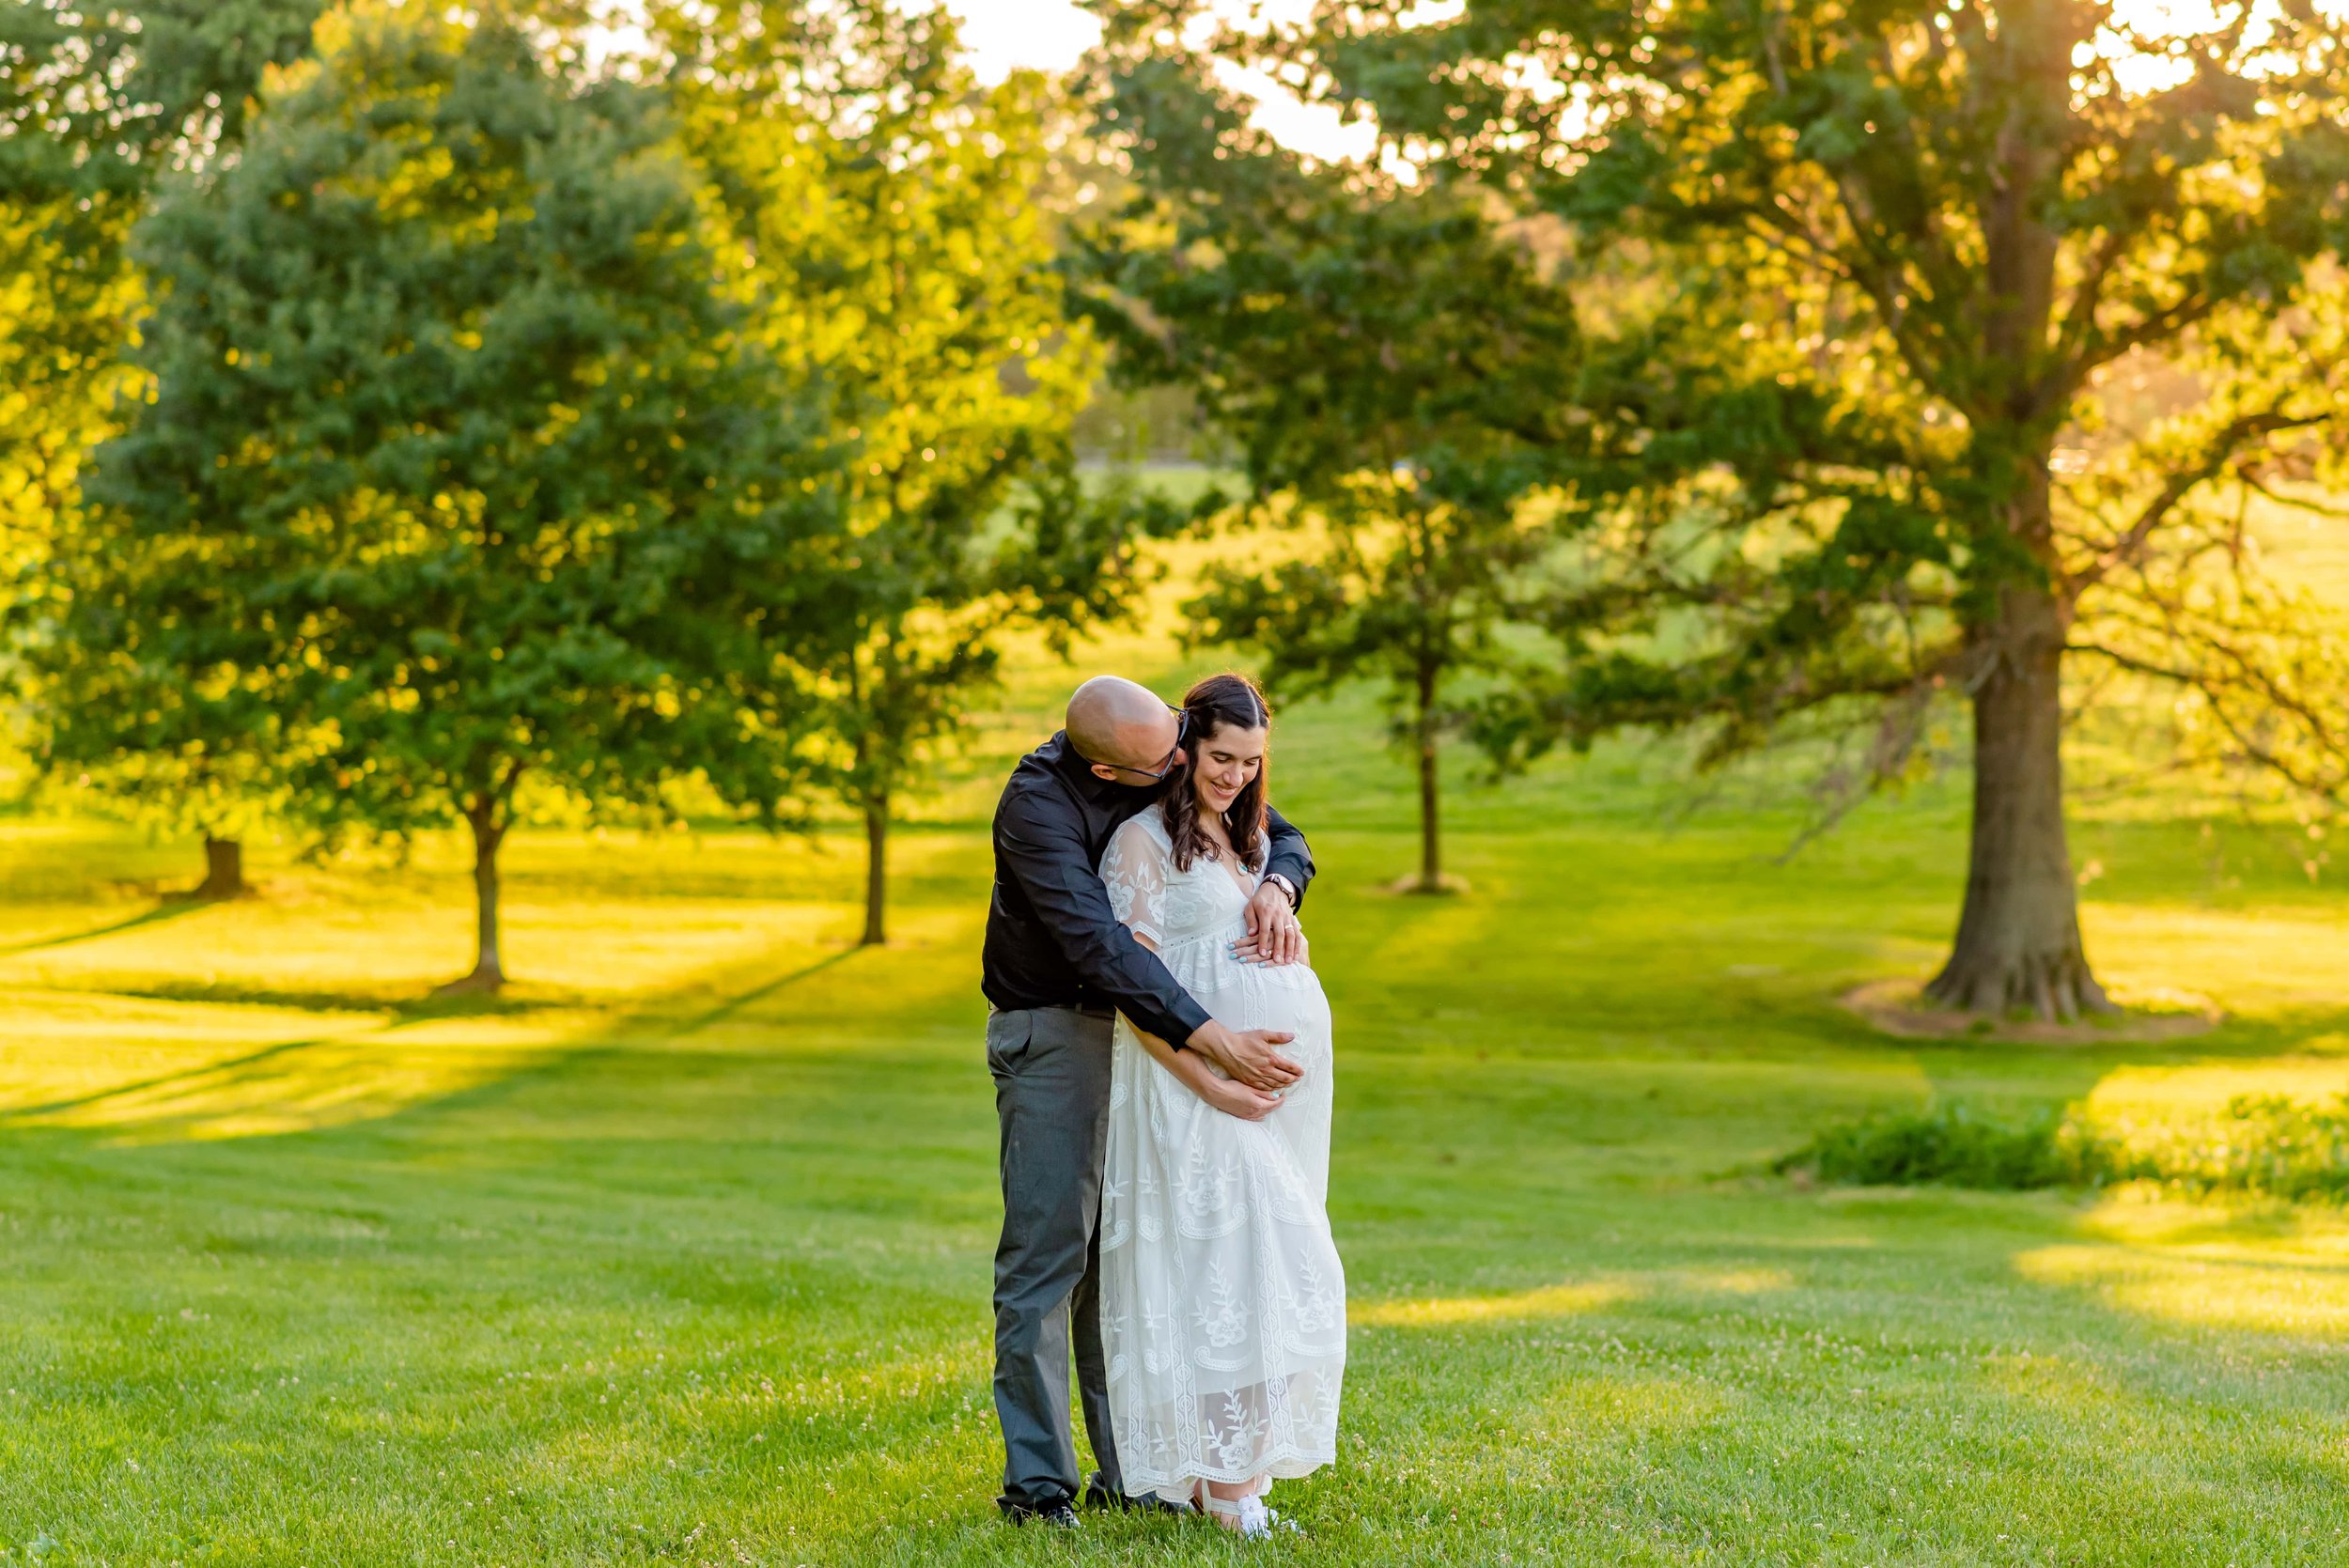 Maryland Maternity couples photo of man and woman standing in a field